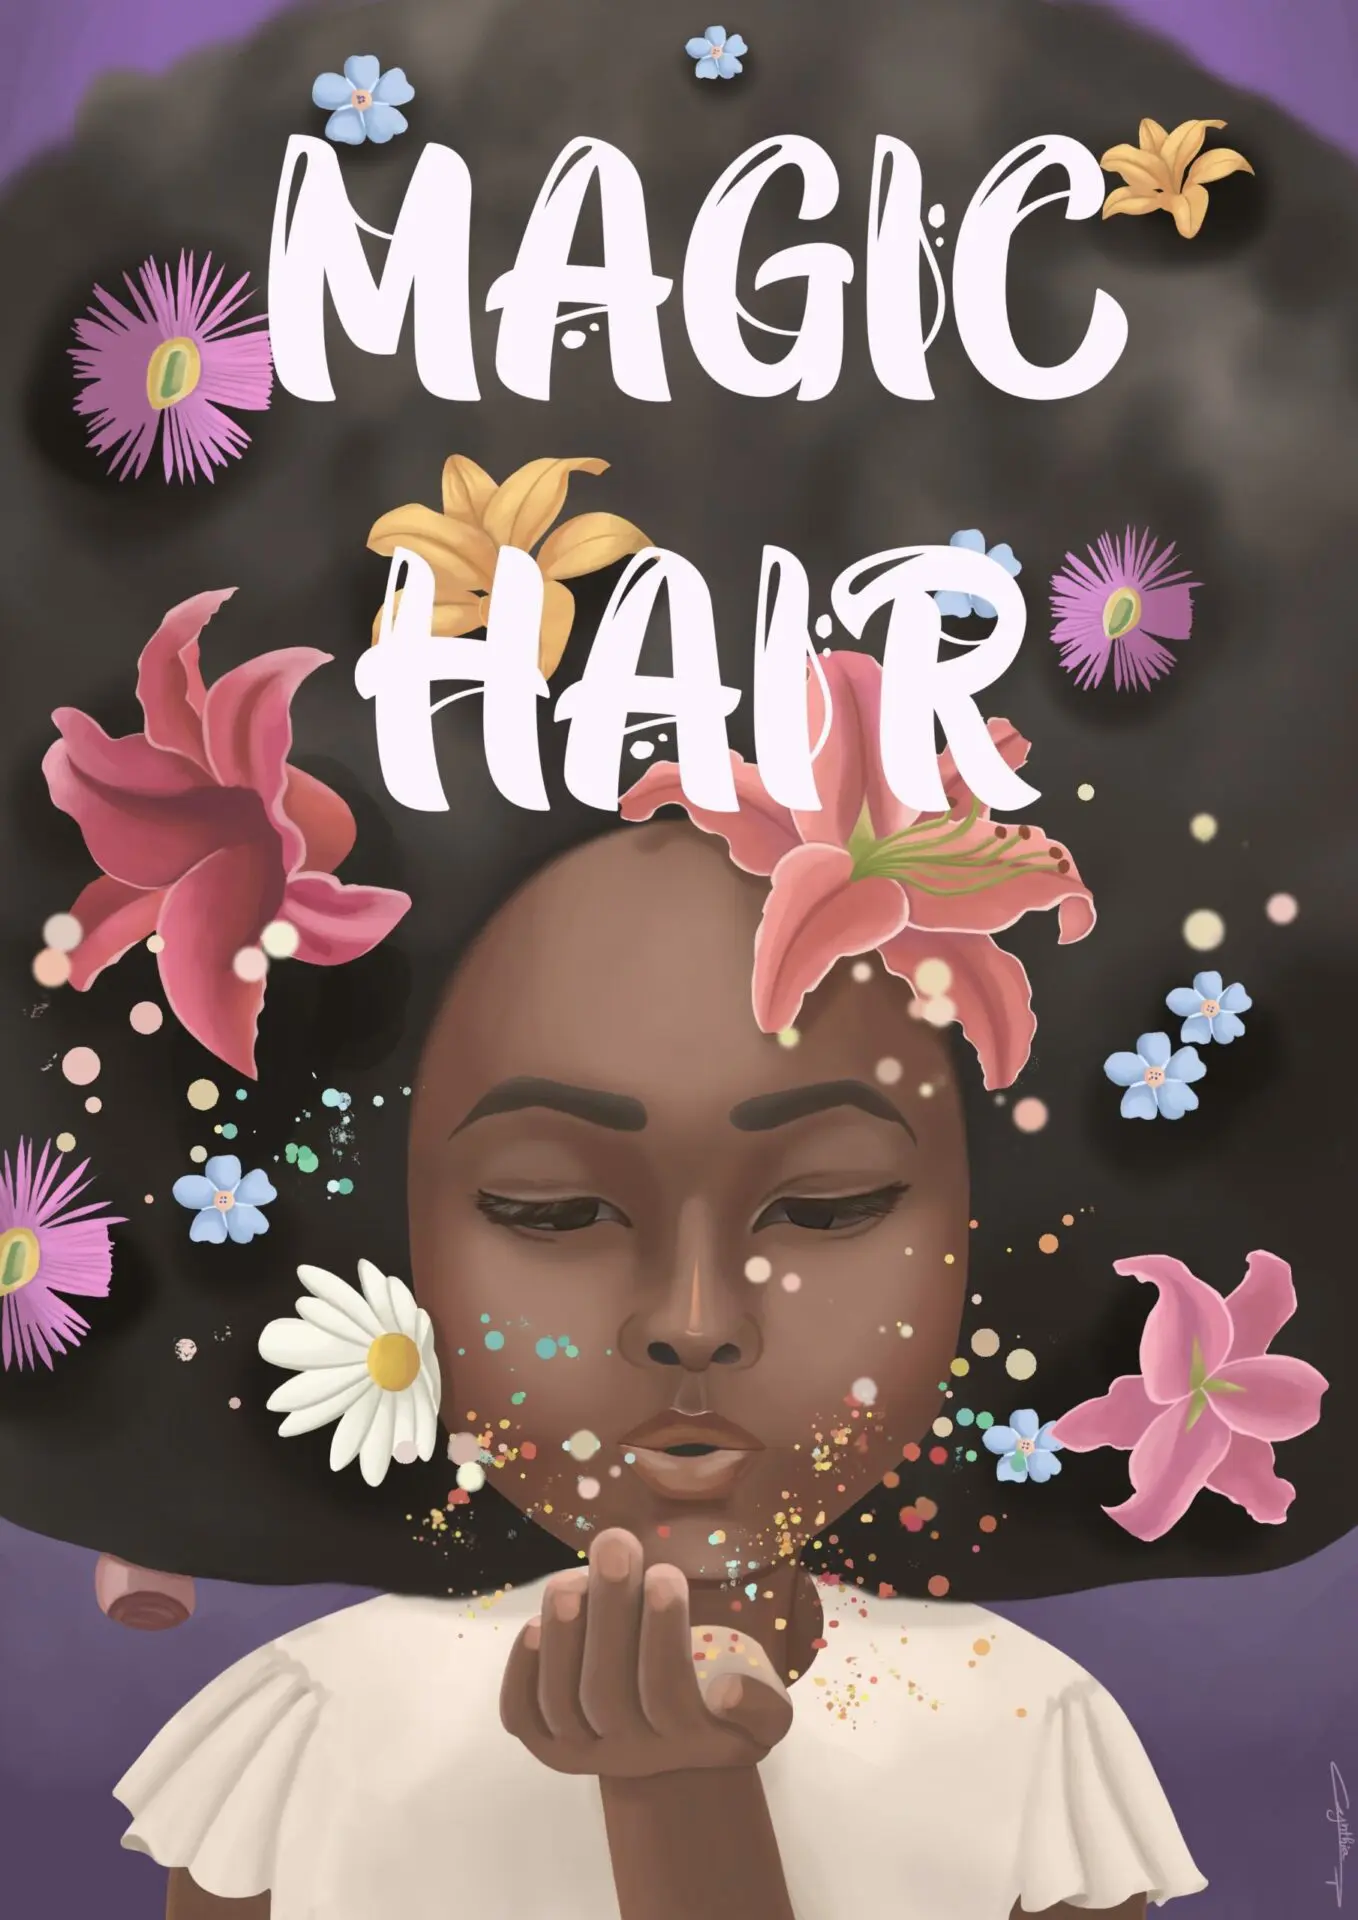 book cover girl with afro hair by Cynthia Artstudio